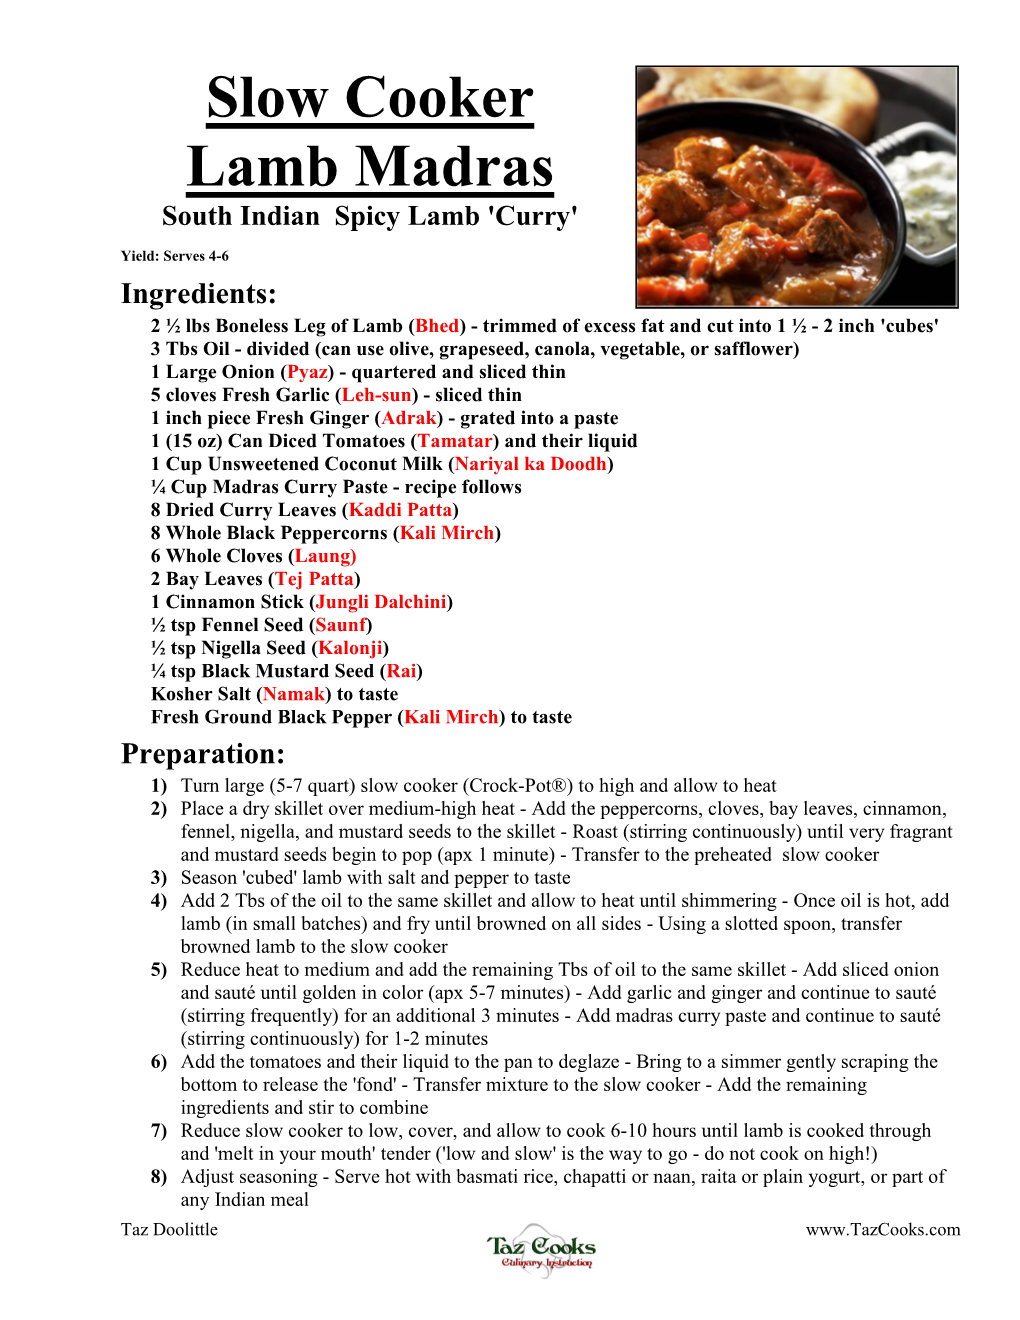 Slow Cooker Lamb Madras South Indian Spicy Lamb 'Curry'